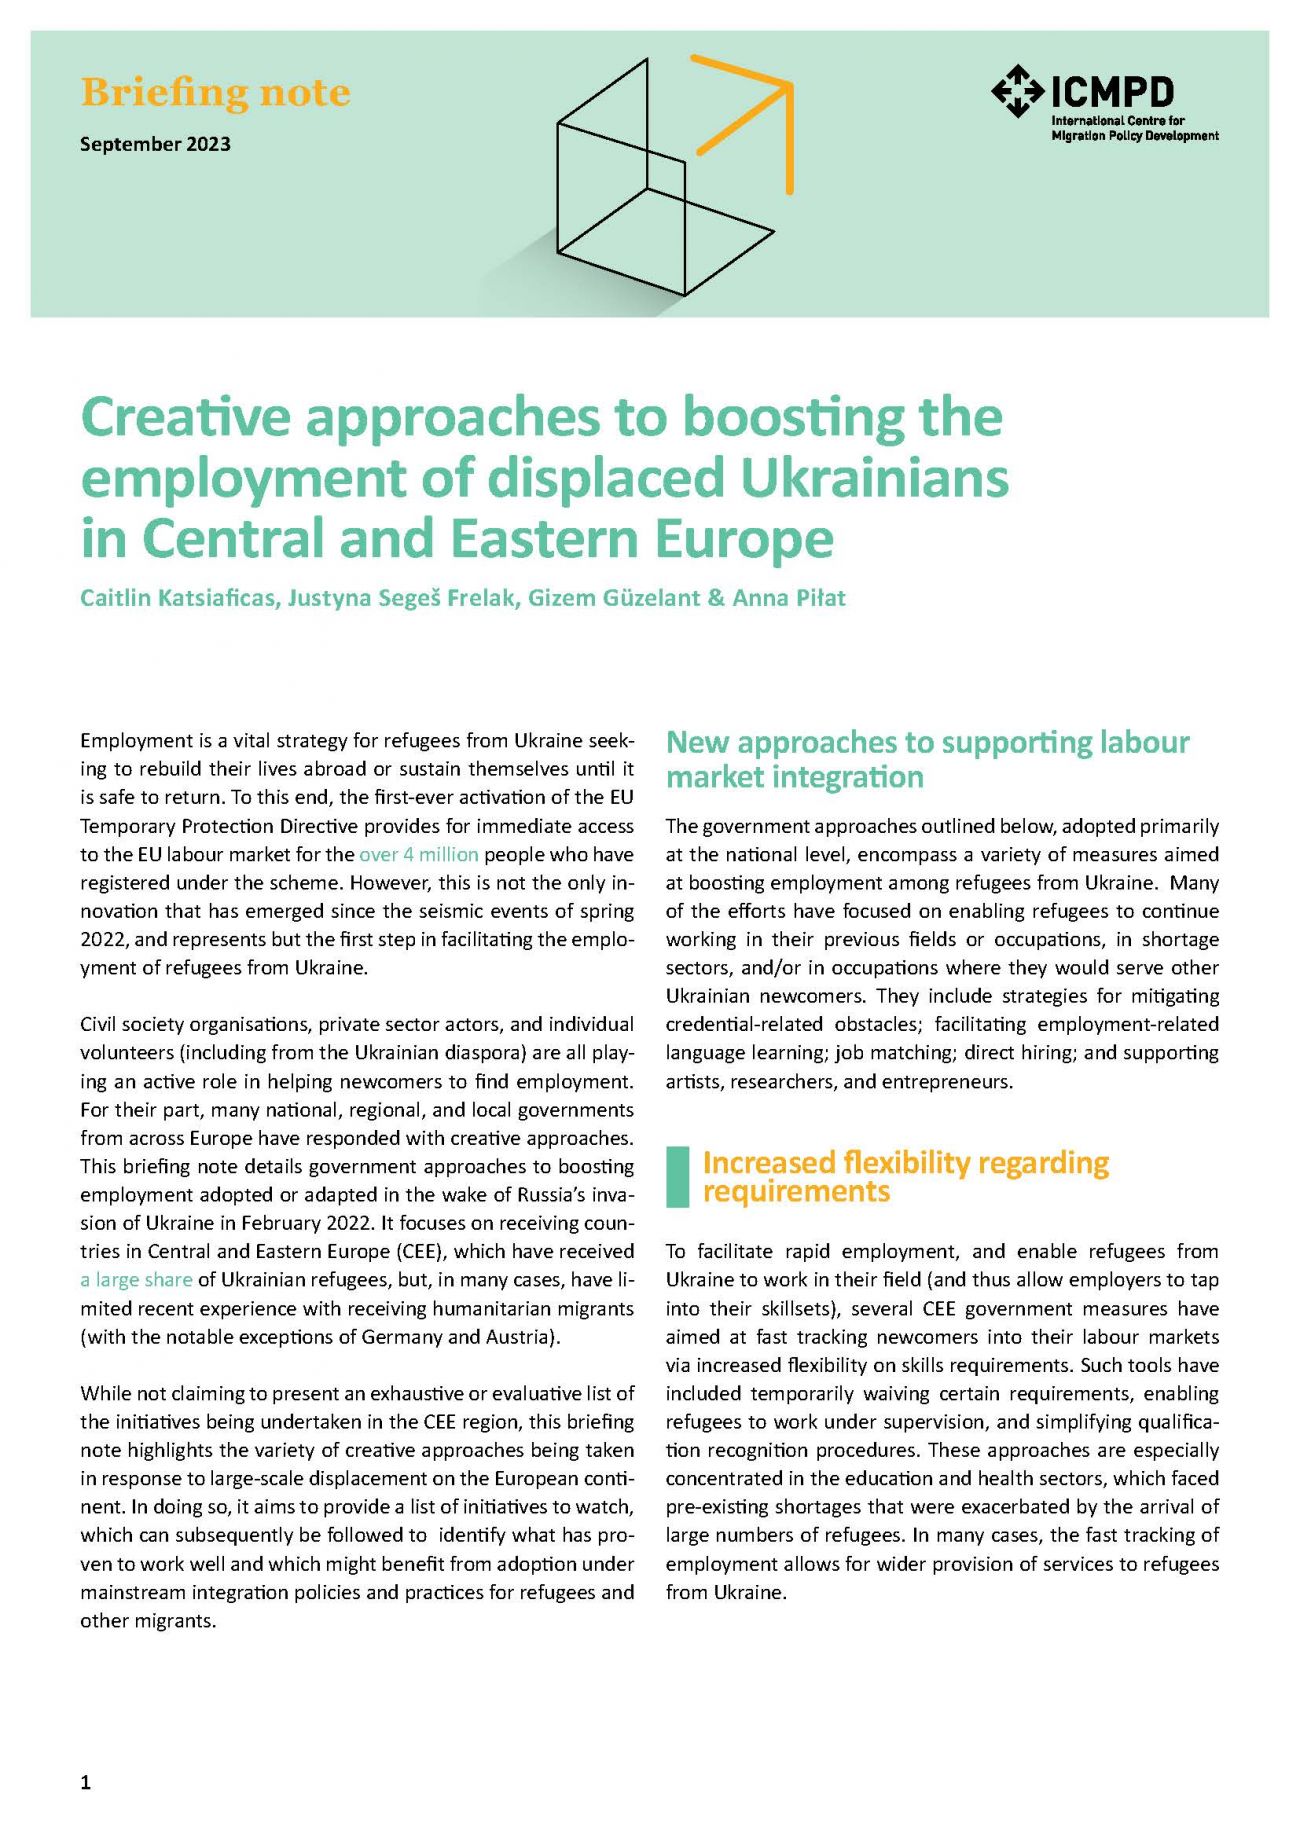 Creative_approaches_to_boosting_the_employment_of_displaced_Ukrainians_Page_1.jpg